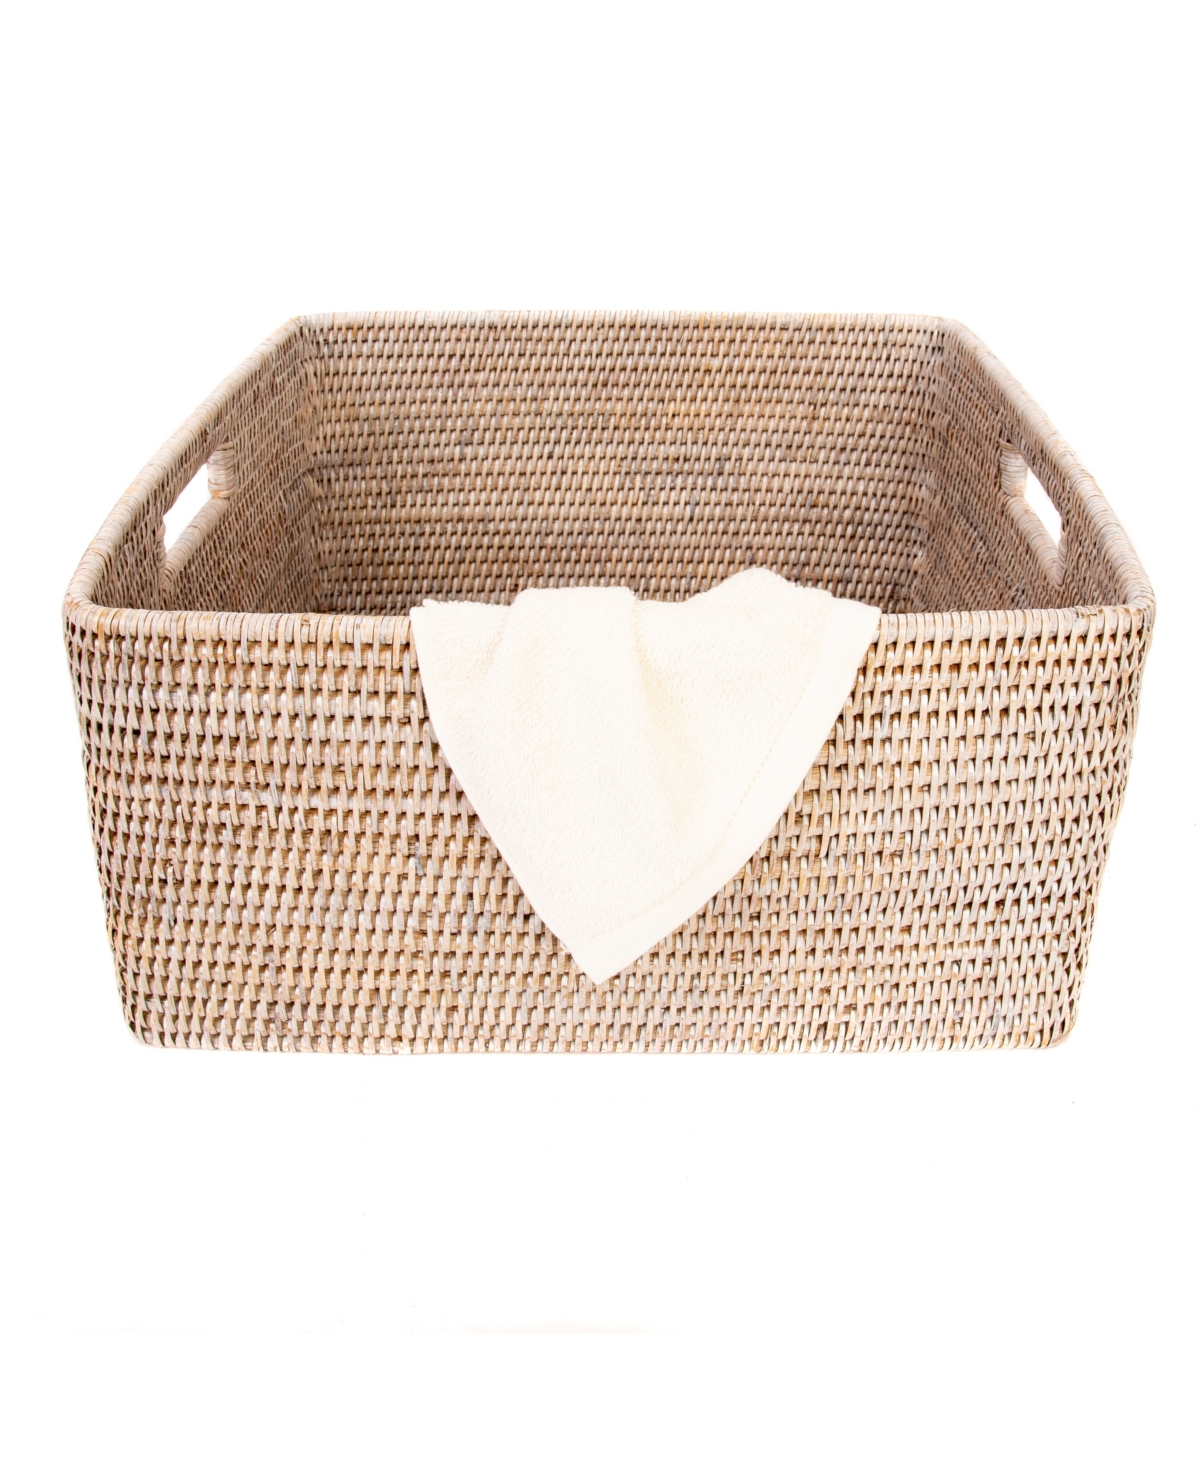 Shop Artifacts Trading Company Artifacts Rattan Square Storage Basket In Off-white